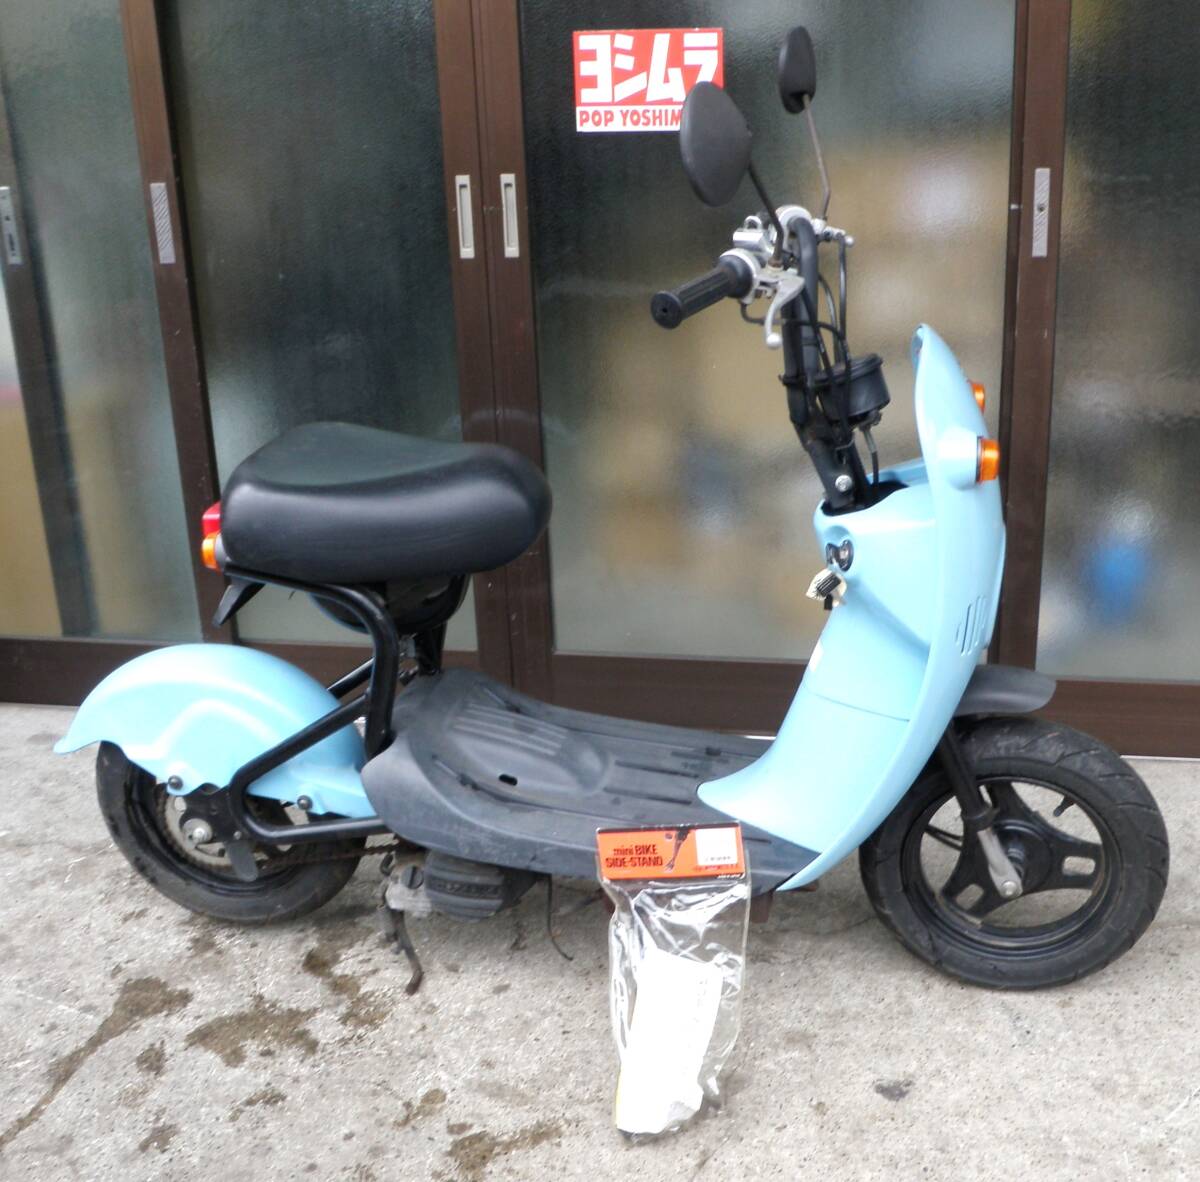  Choinori 1609KM base car both helmet holder nisi Moto side stand NK-521 new goods sale certificate attaching animation have taking over only Suginami district 